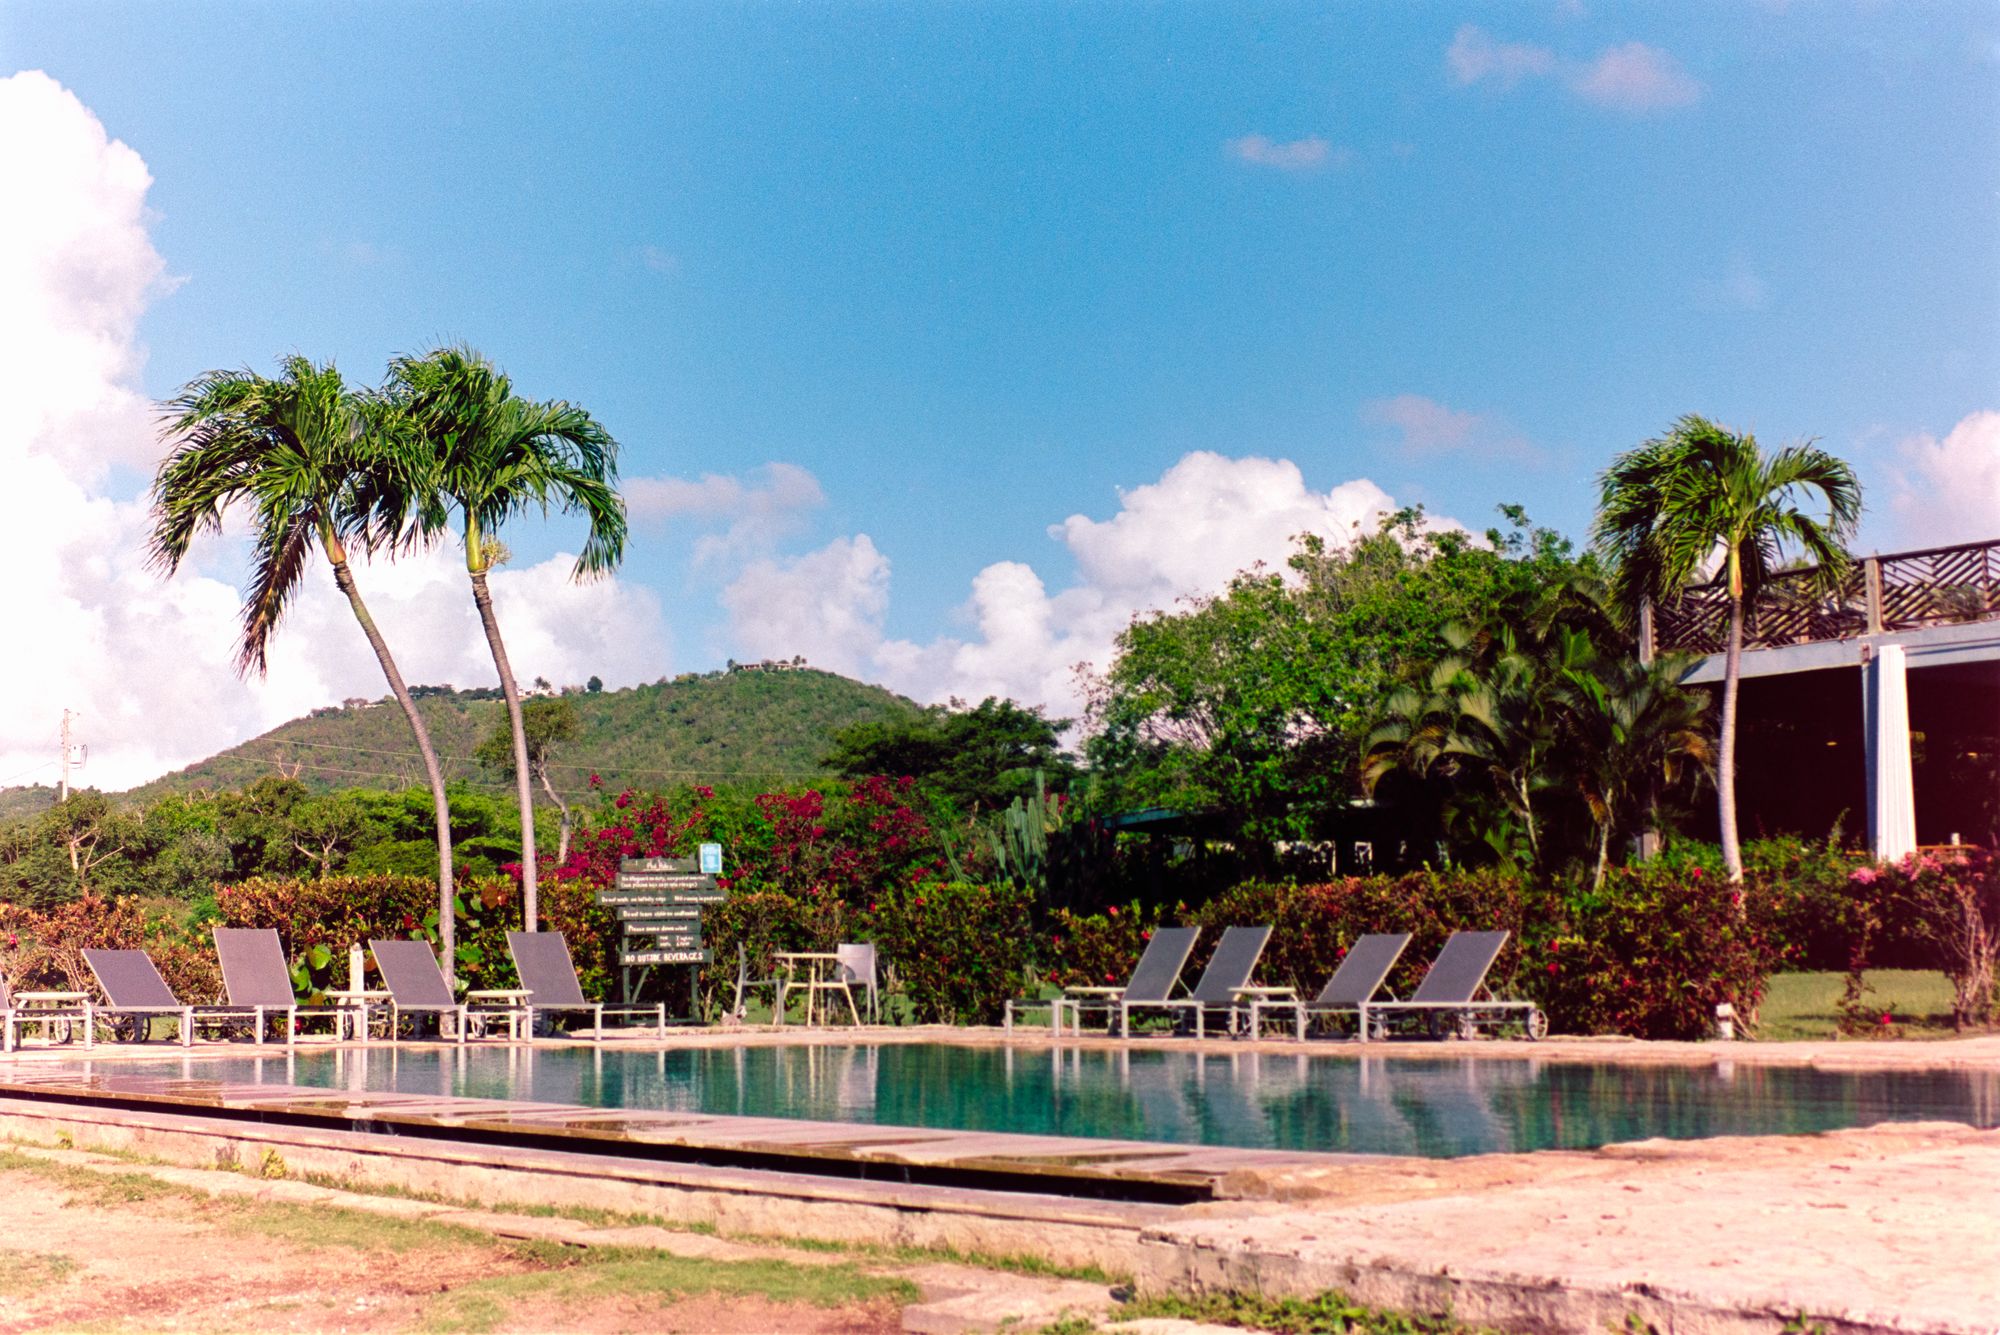 Vieques, Puerto Rico with the Nikon F3